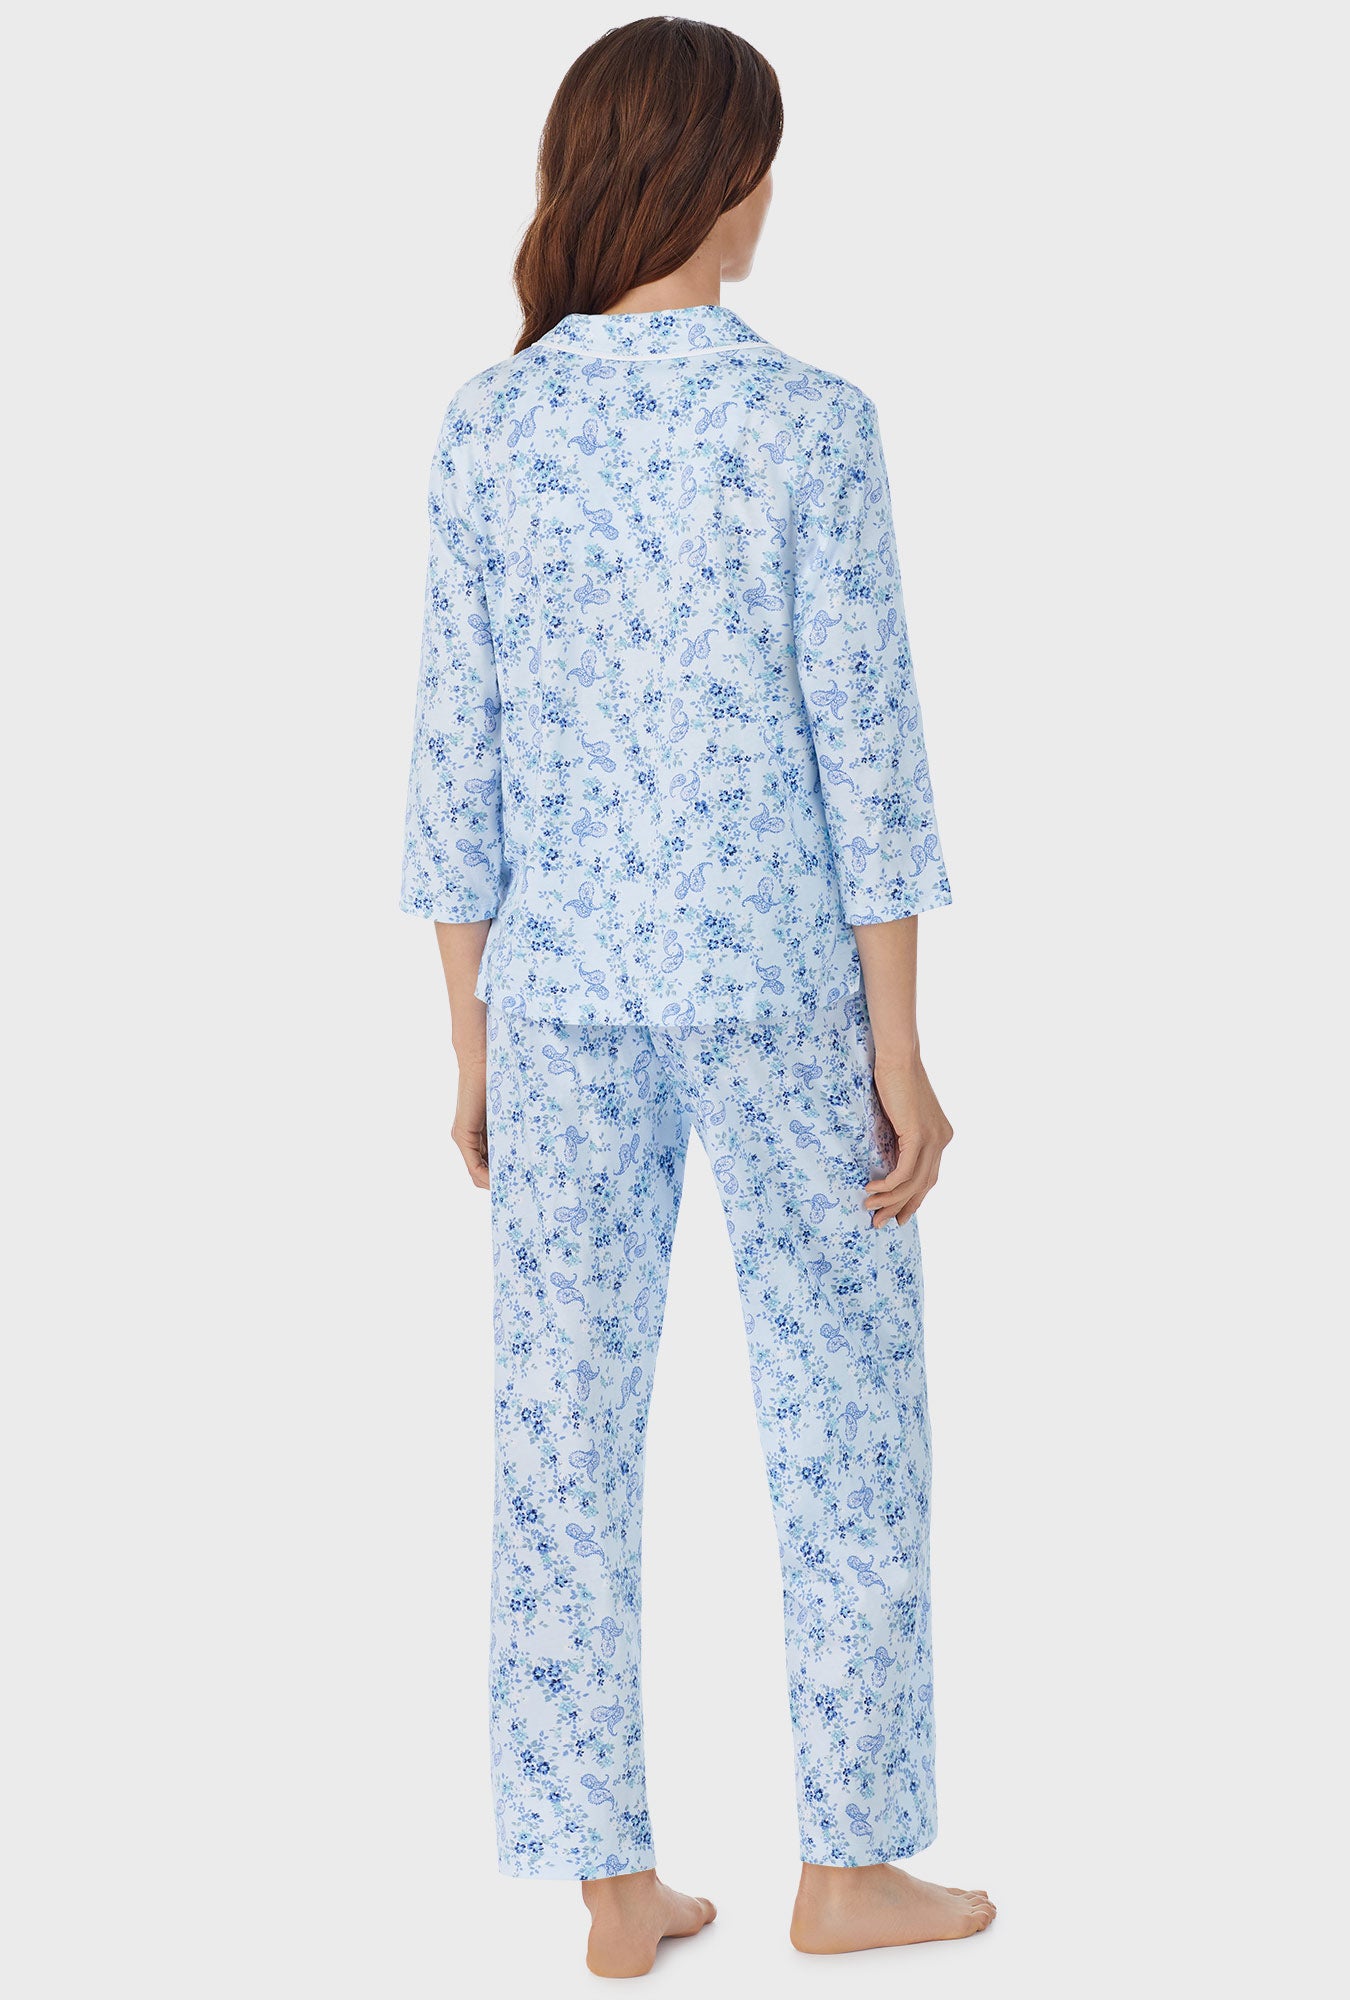 A lady wearing white long pajama set with Paisley Bouquet print